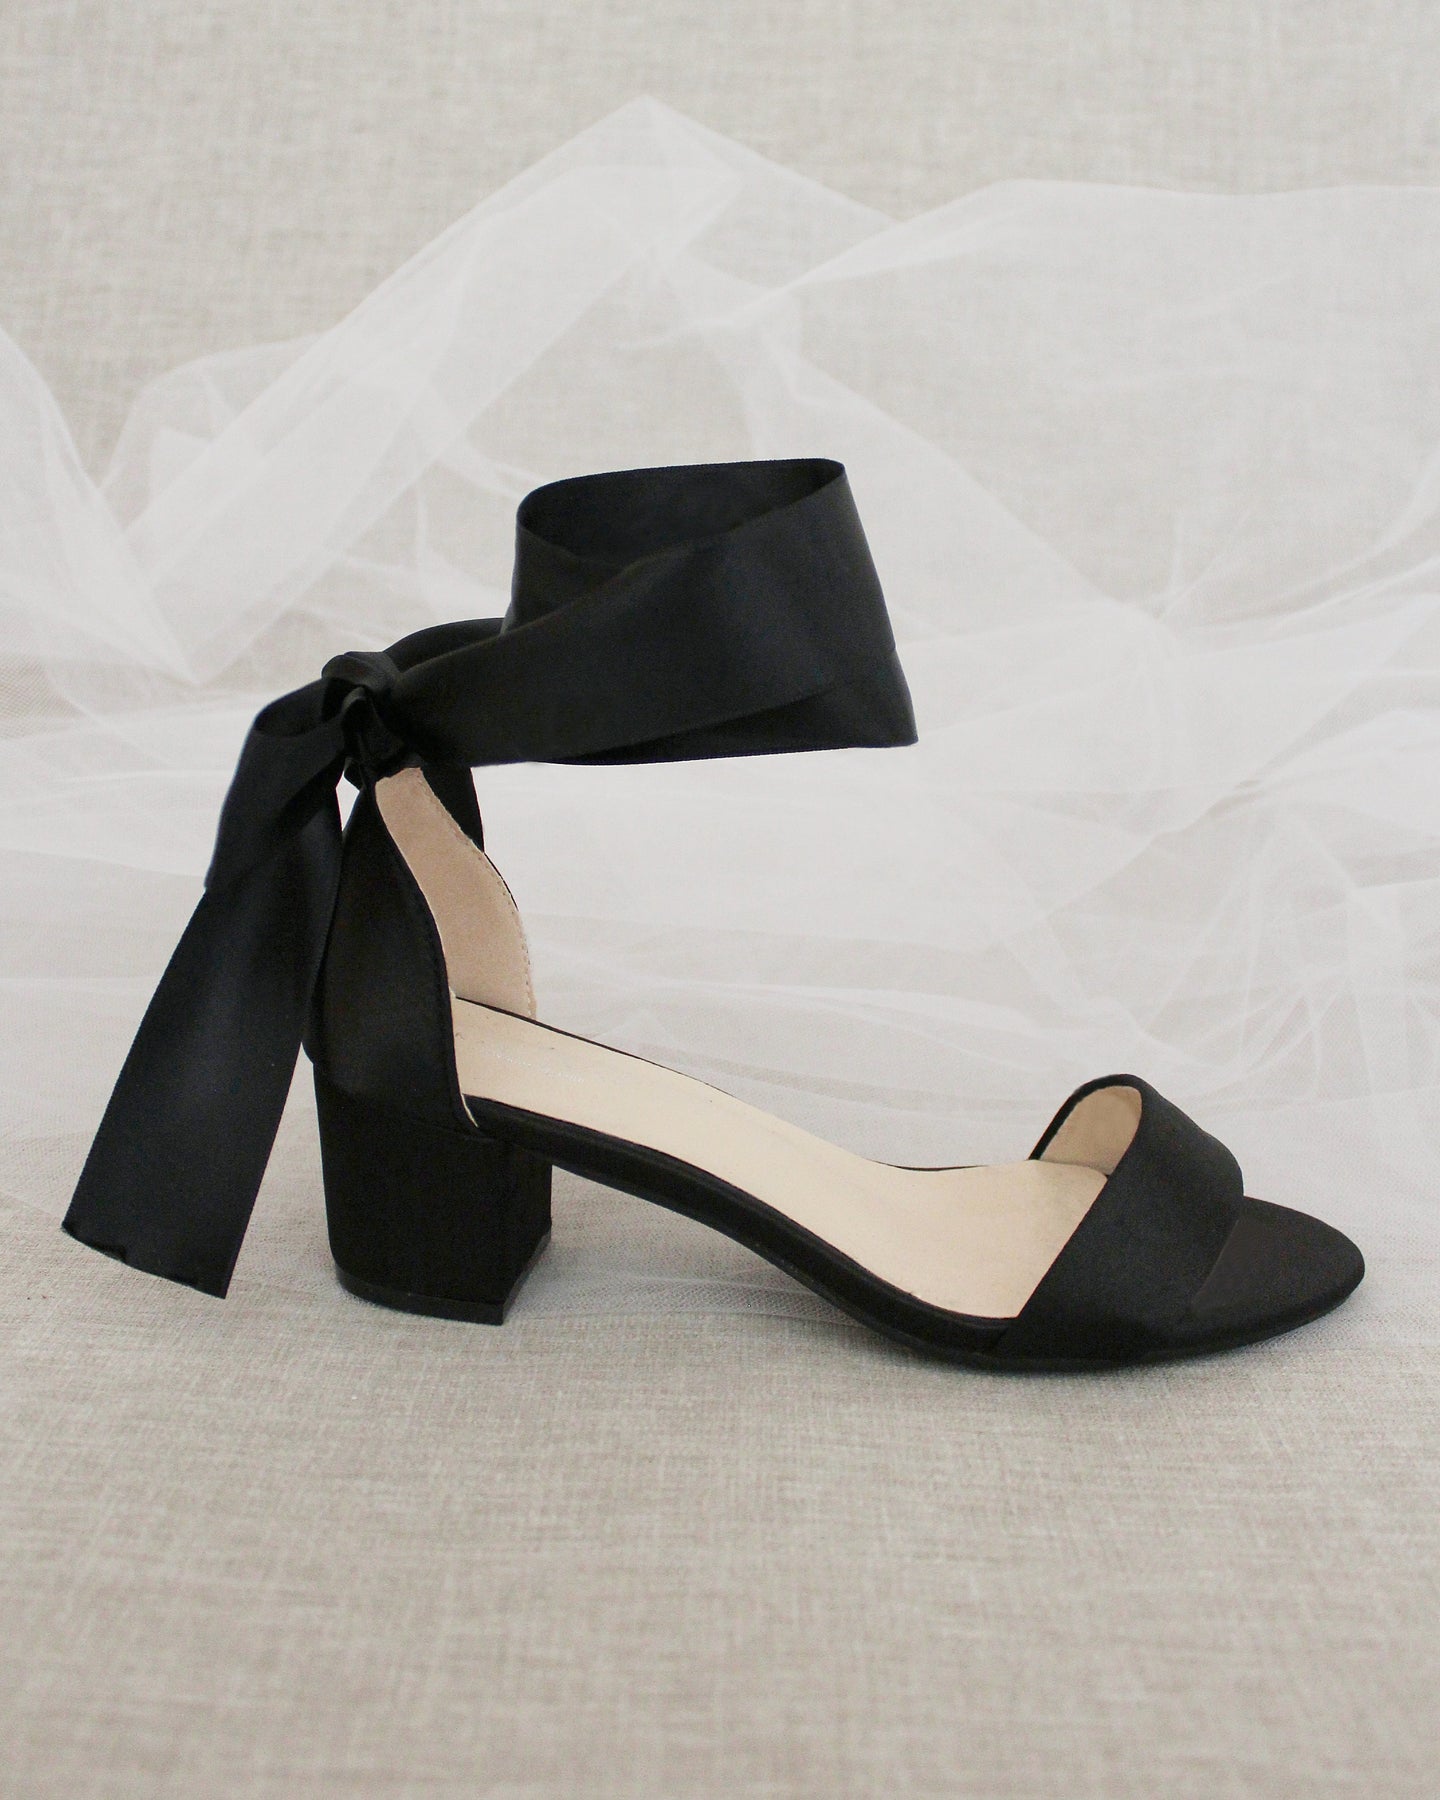 Black Satin Block Heel Sandal with Wrapped Satin Tie - Bridesmaid Shoes ...